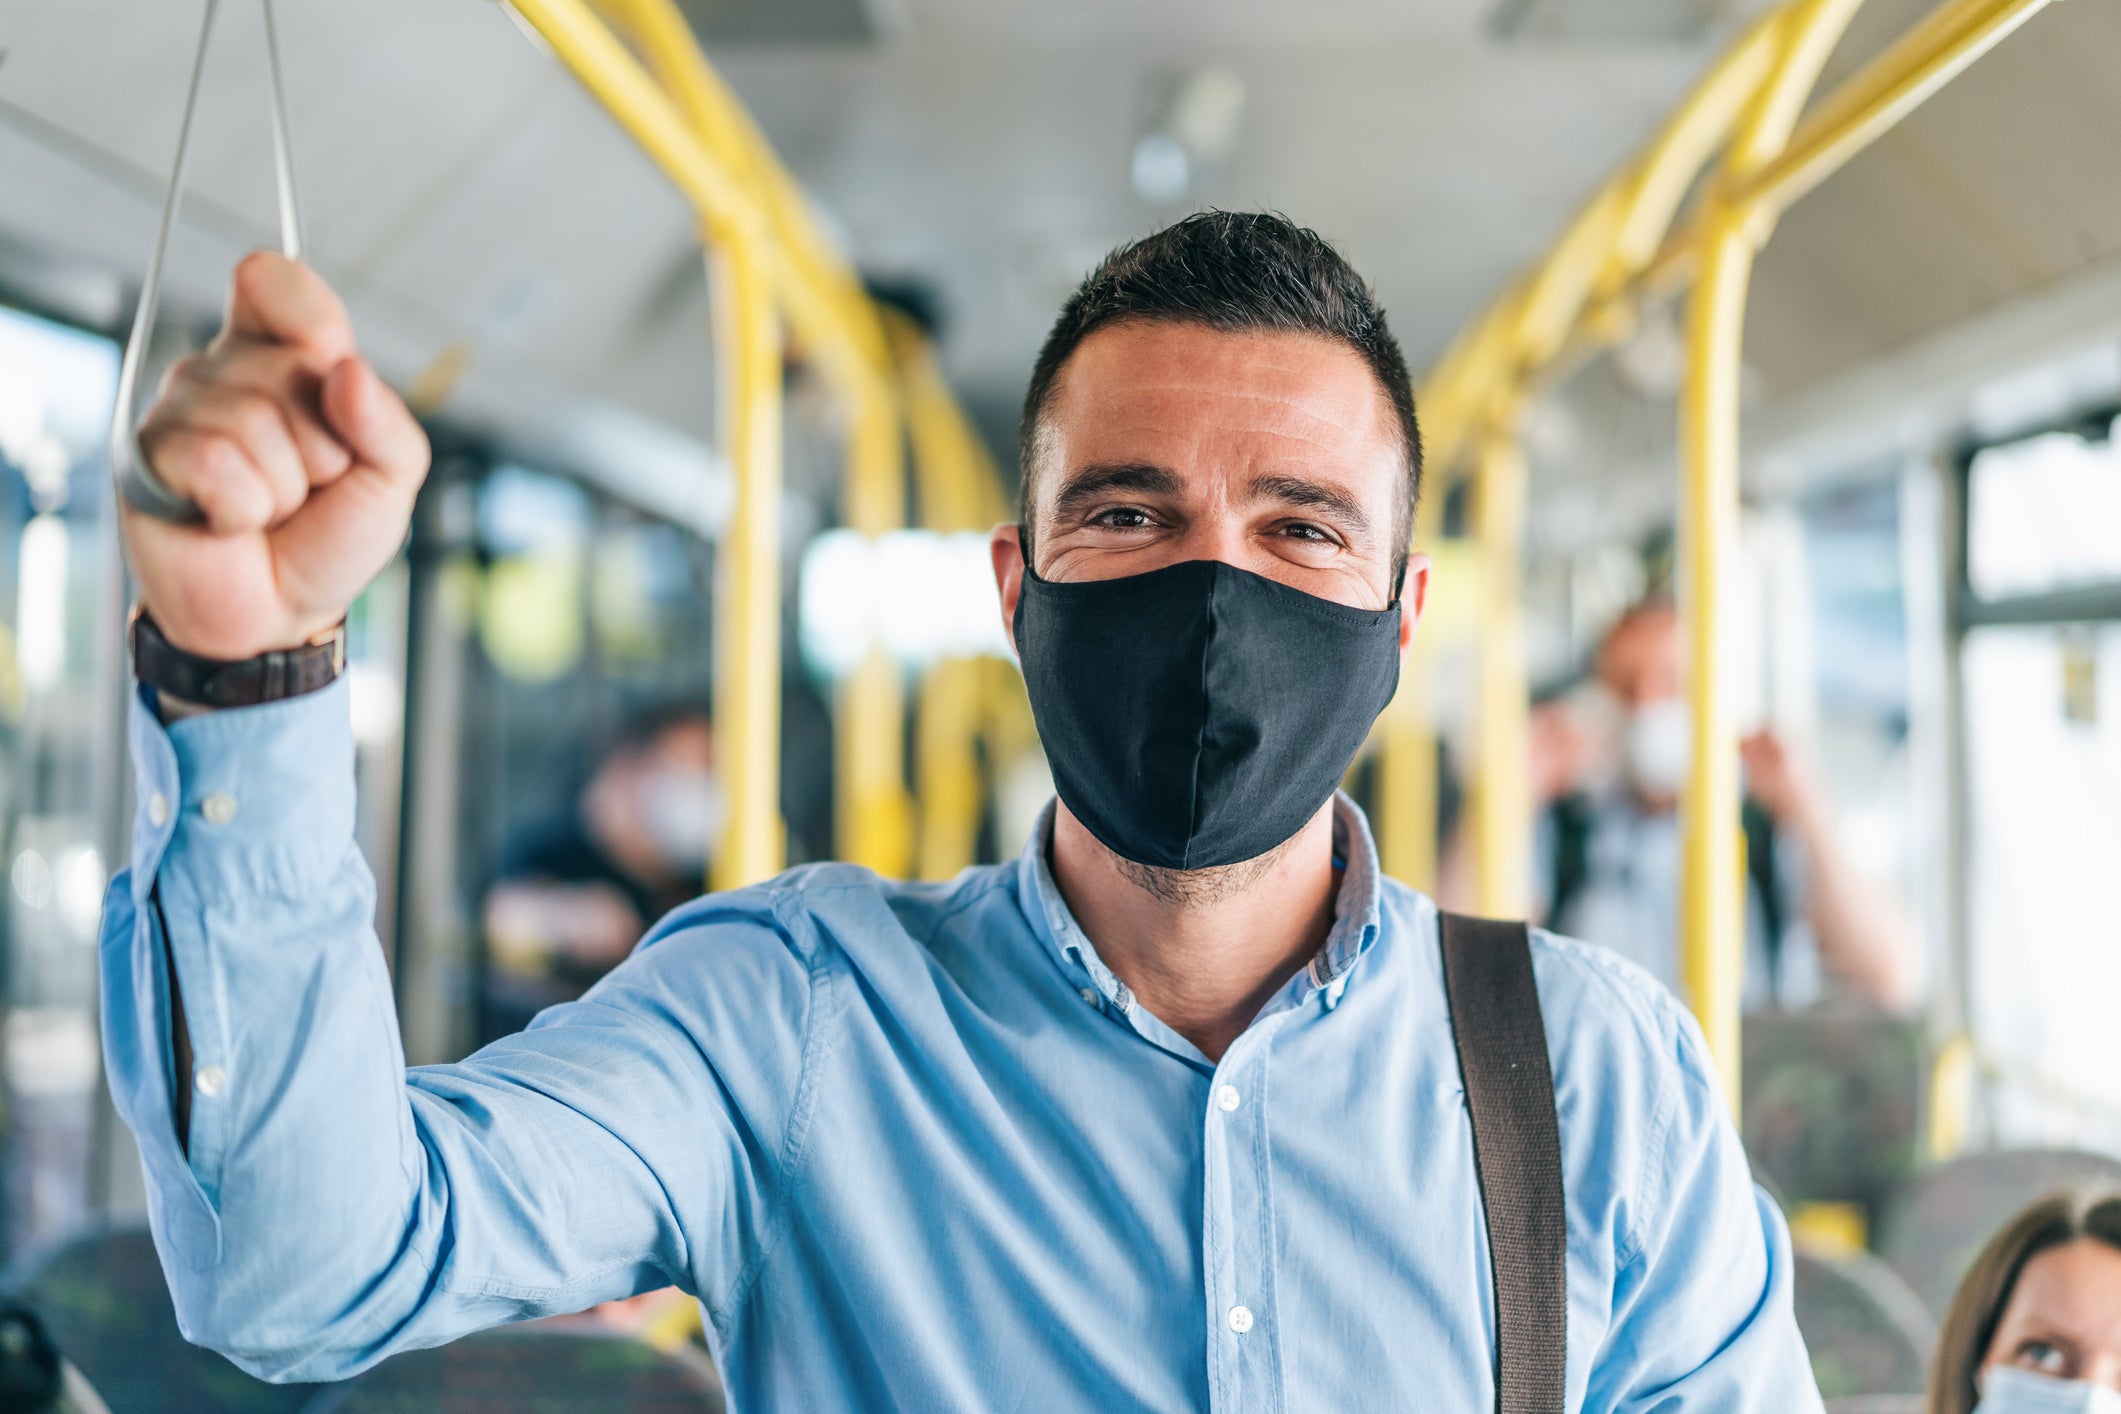 Men traveling in the bus smiling behind a mask.